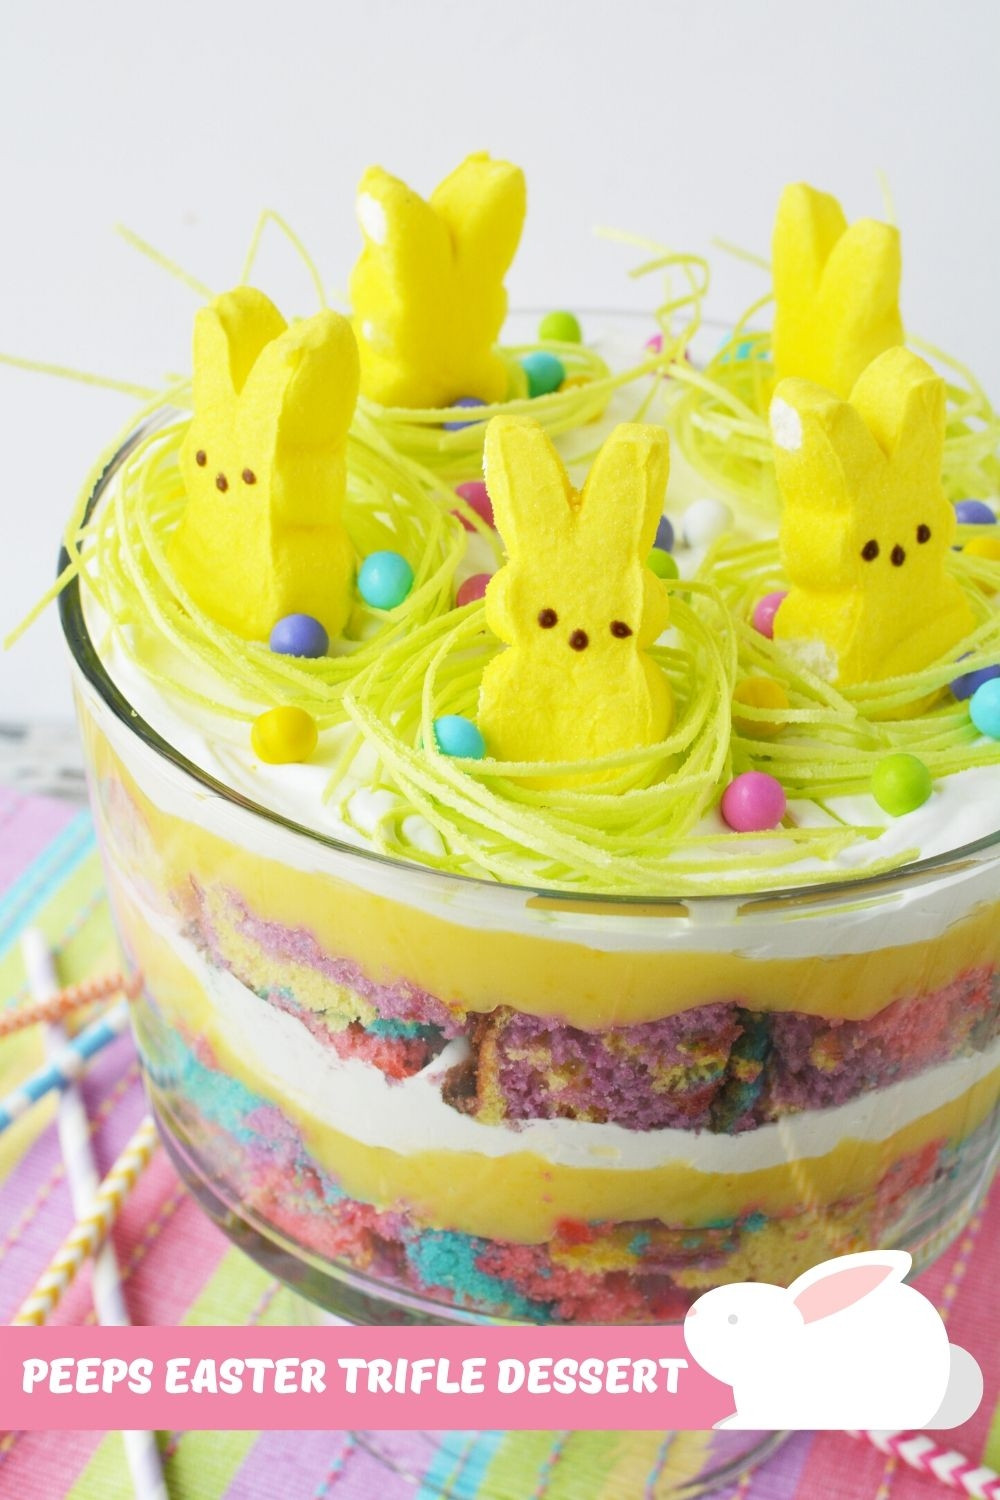 Easter Cake Easter Desserts
 Cute & Easy The Easter Trifle Dessert Recipe You Need To Make